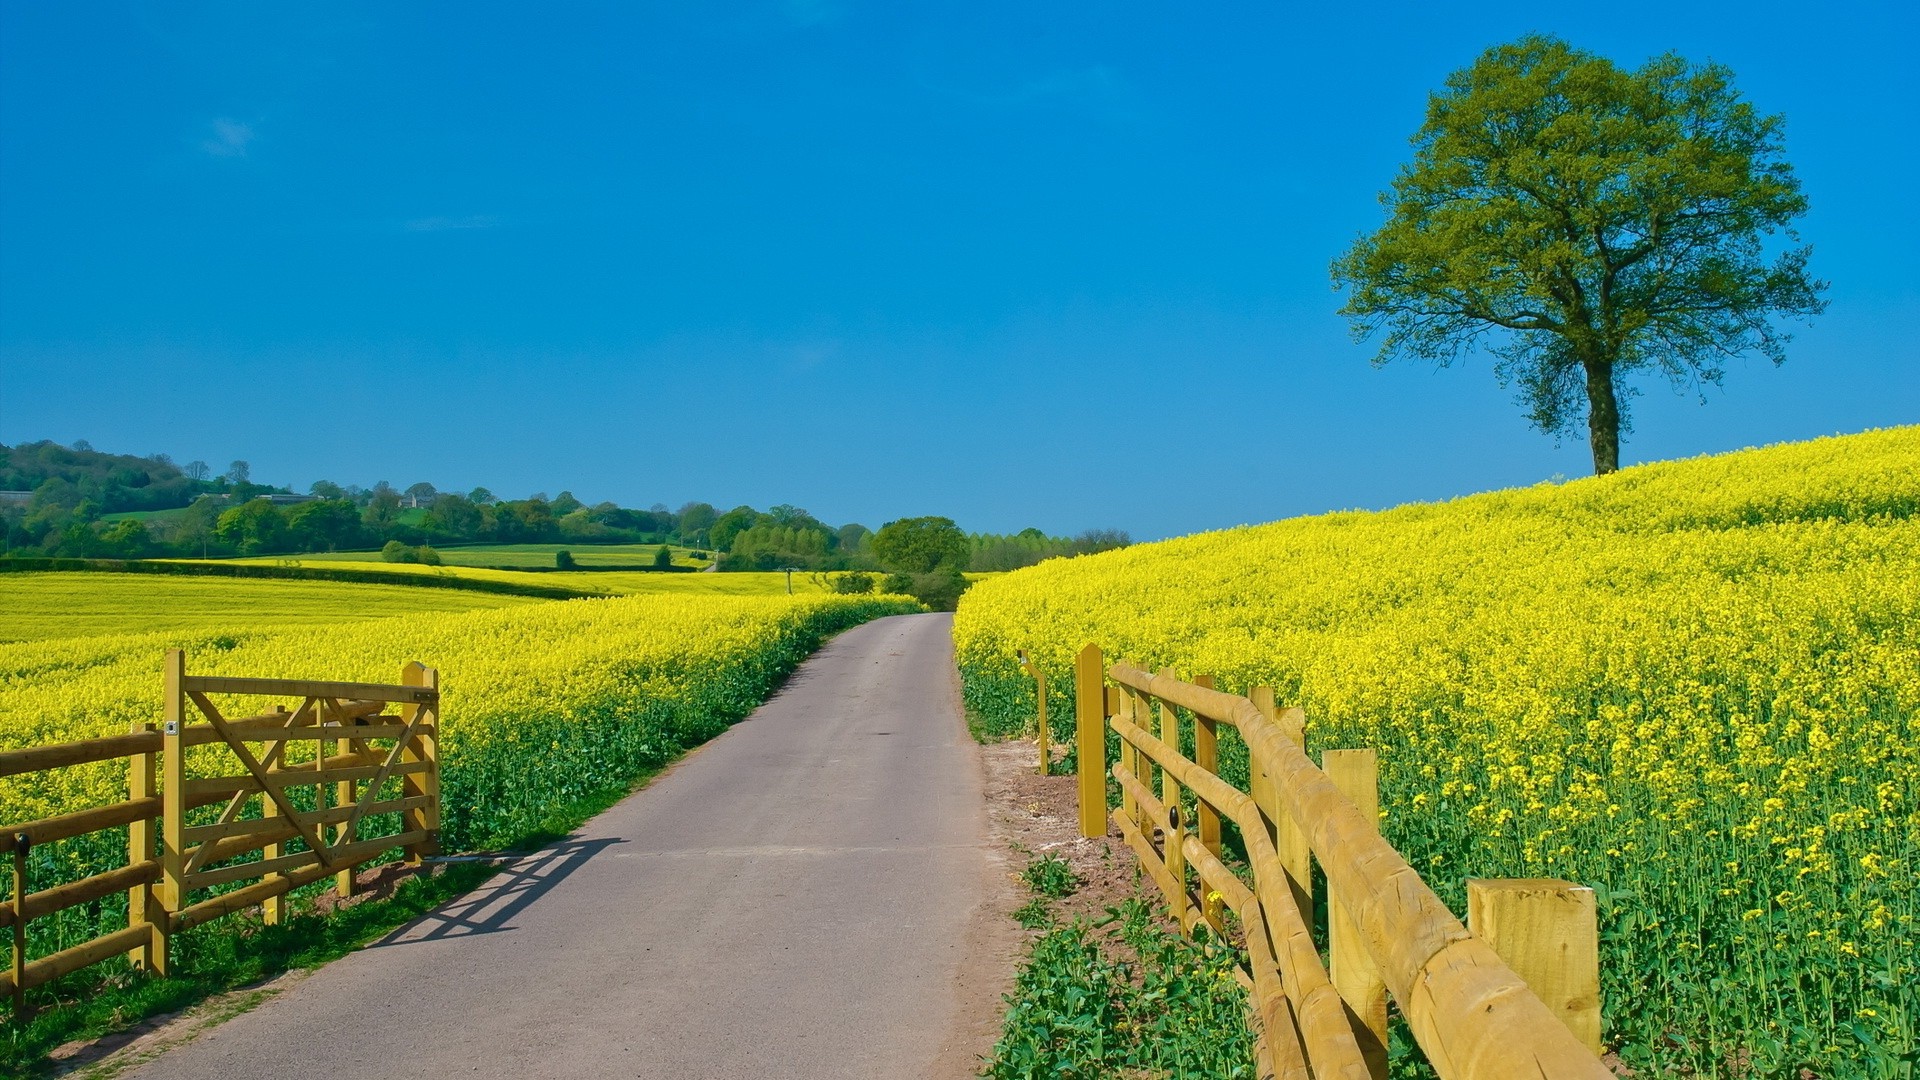 1920x1080 wallpapers: road, fencing, summer, flowers, open spaces, day, slopes (image)